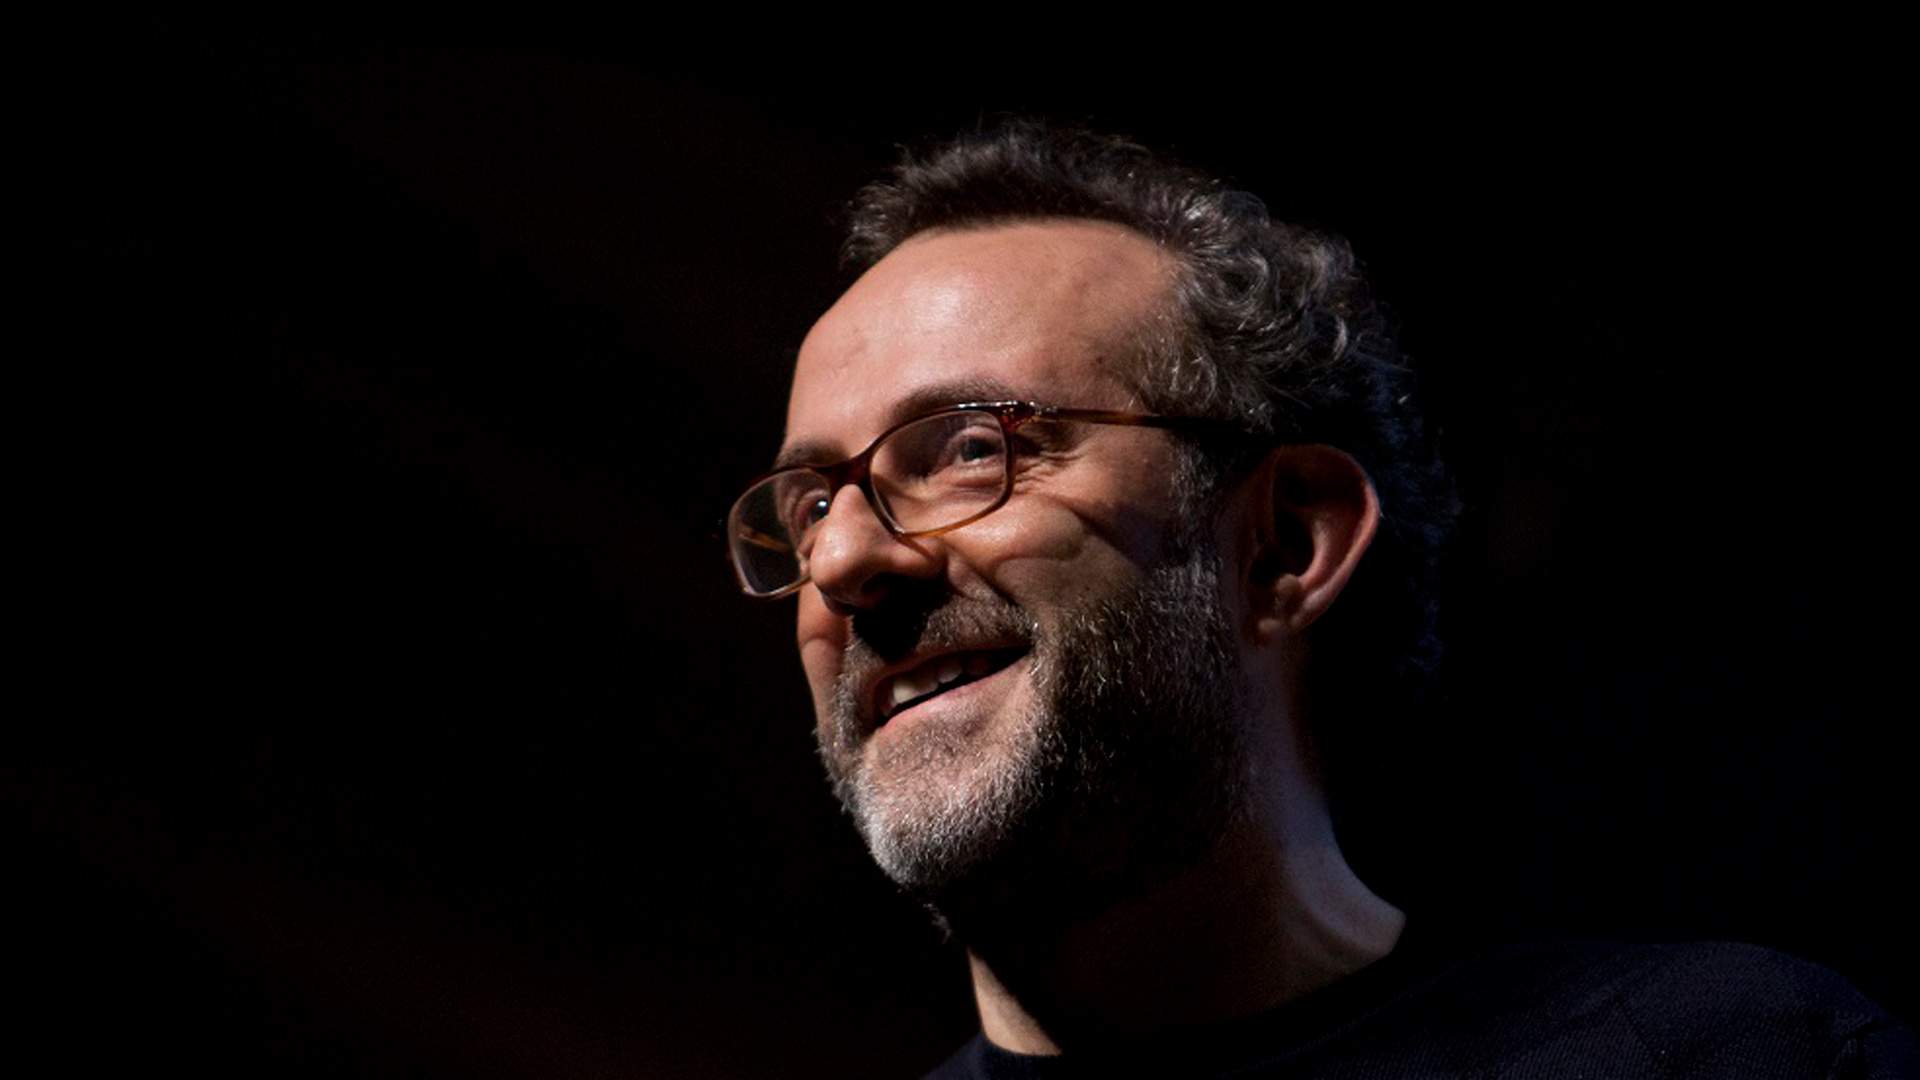 Melbourne Food and Wine Festival Has Launched a New 2020 Program with Massimo Bottura and René Redzepi